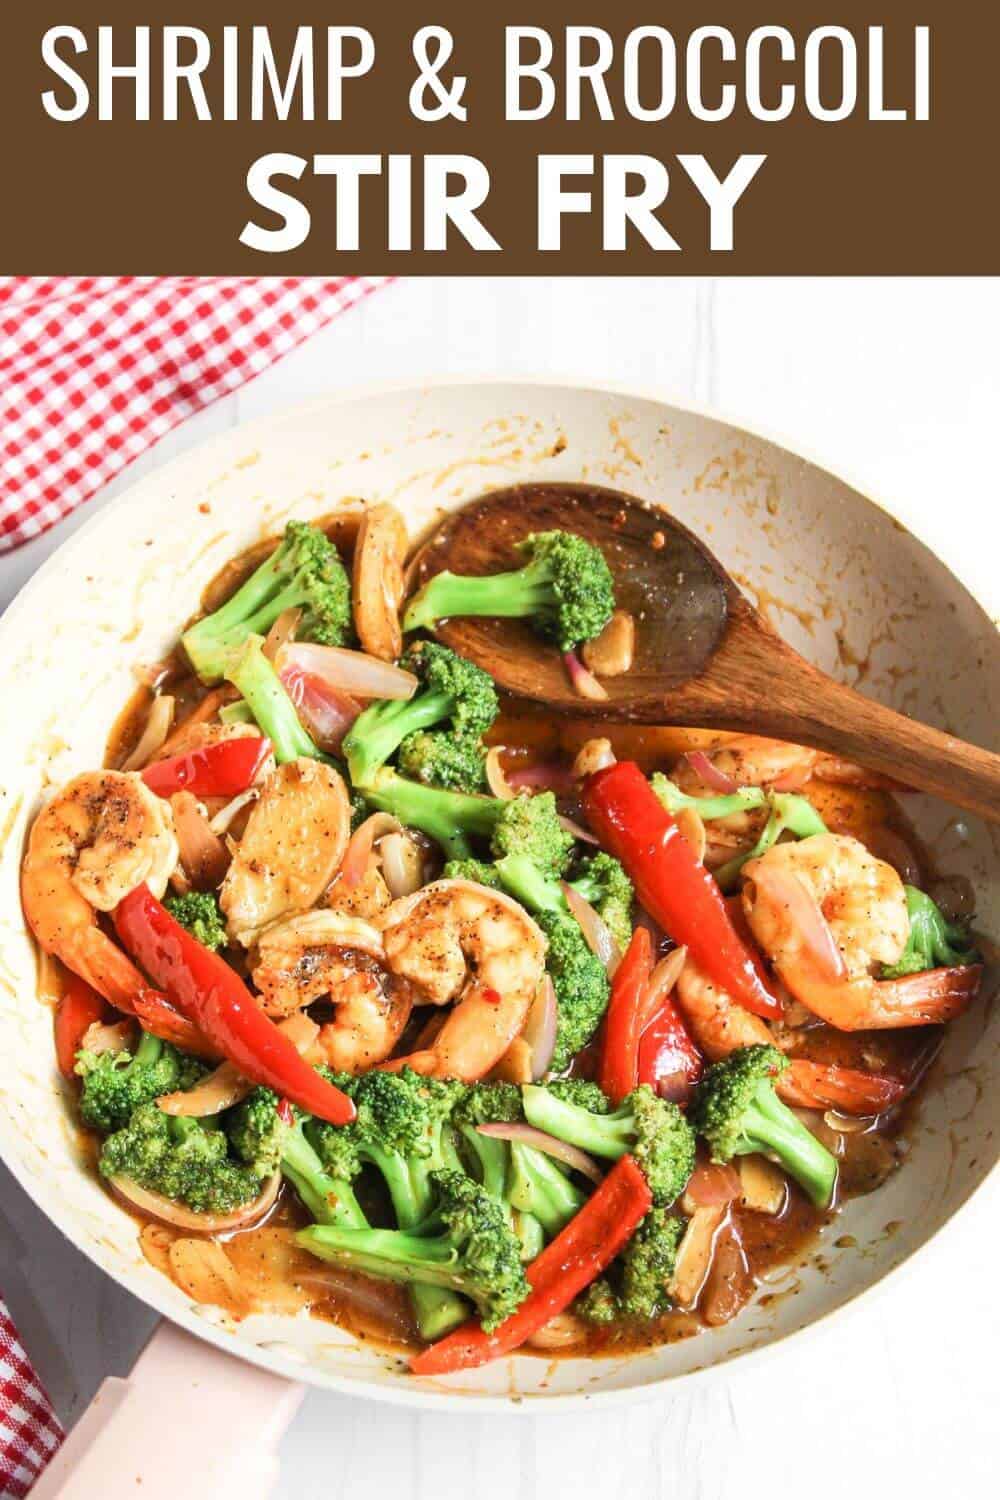 Shrimp and broccoli stir fry with recipe title text overlay.